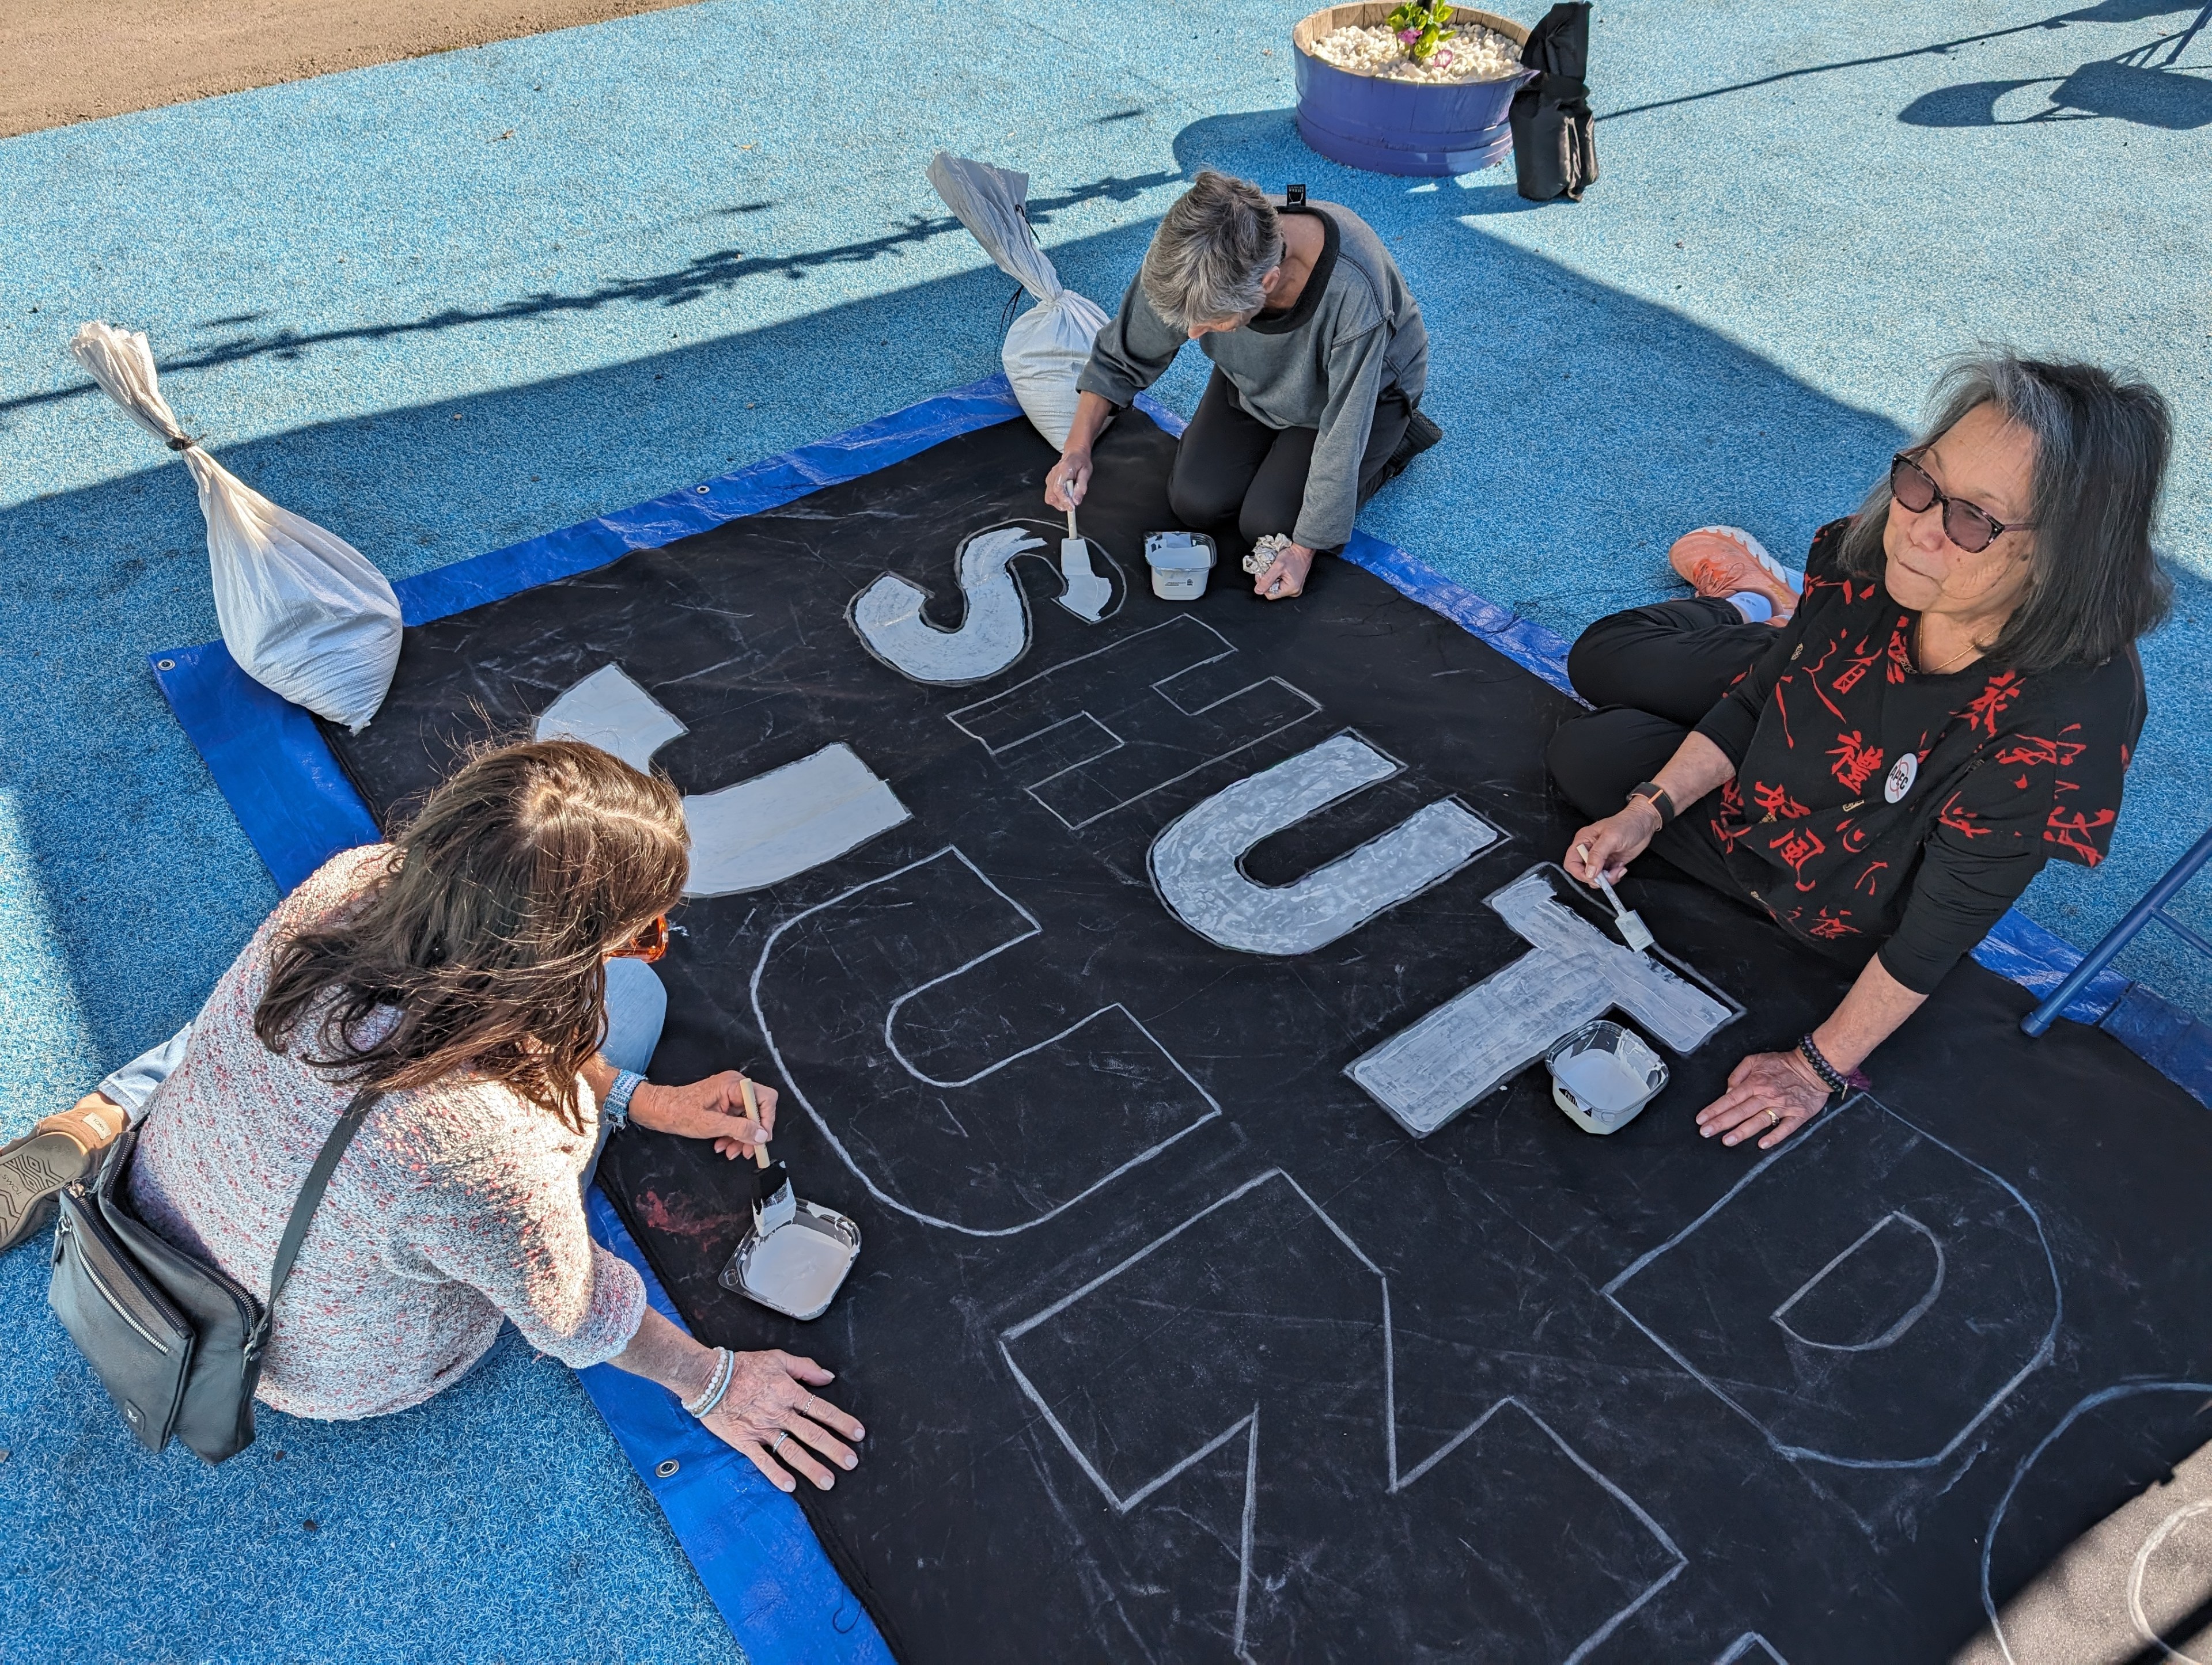 Pam Tau Lee and Kathe Burick paint letters on a “Shut down APEC” sign Sunday at a teach-in at Kawpa Gardens on Mission Street.